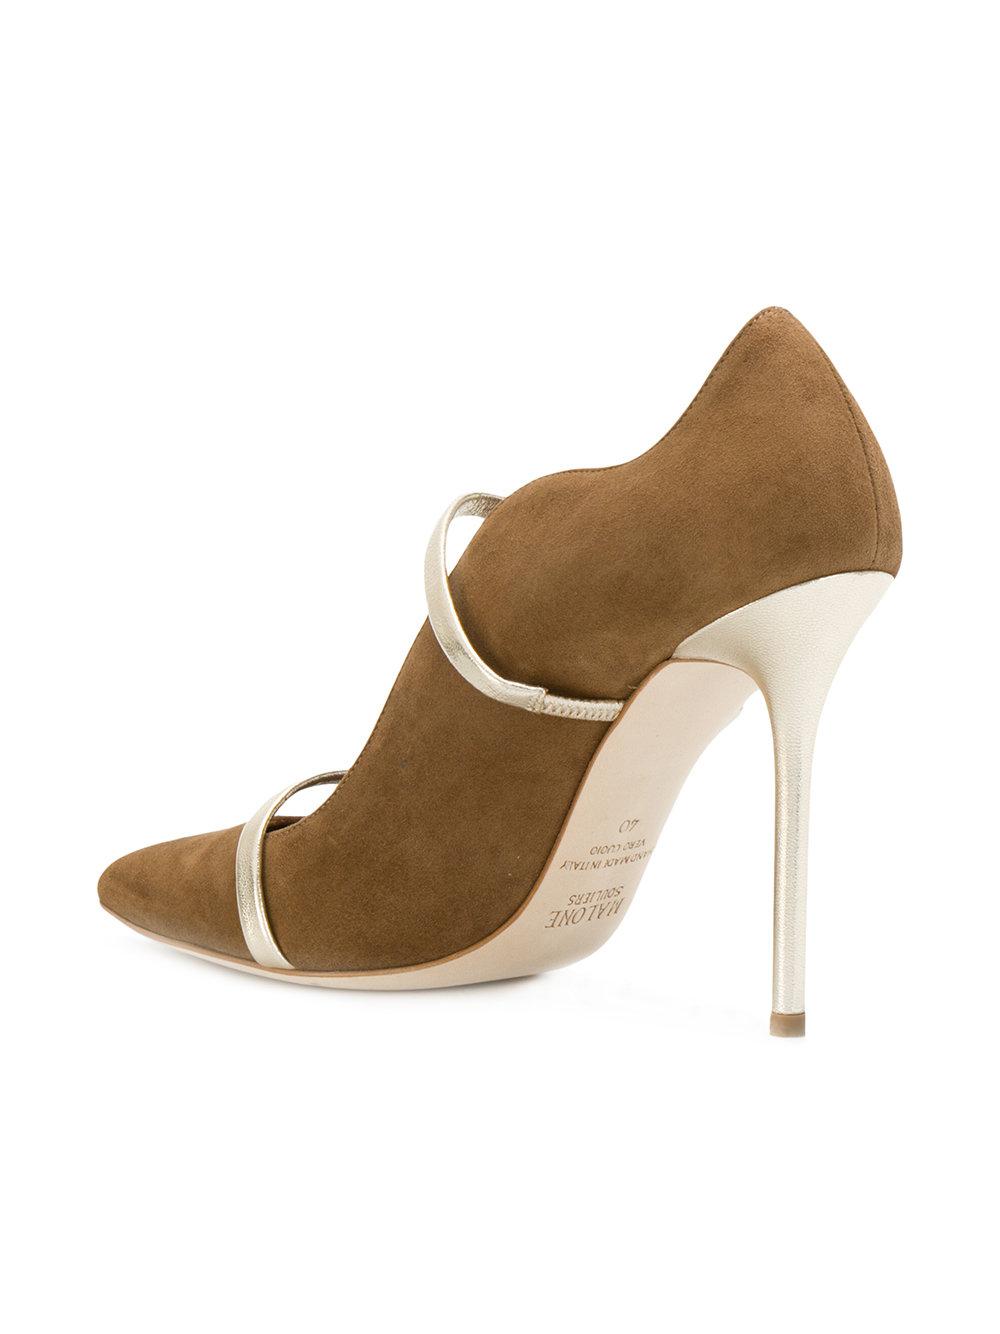 Malone Souliers Maureen Pumps in Brown - Lyst